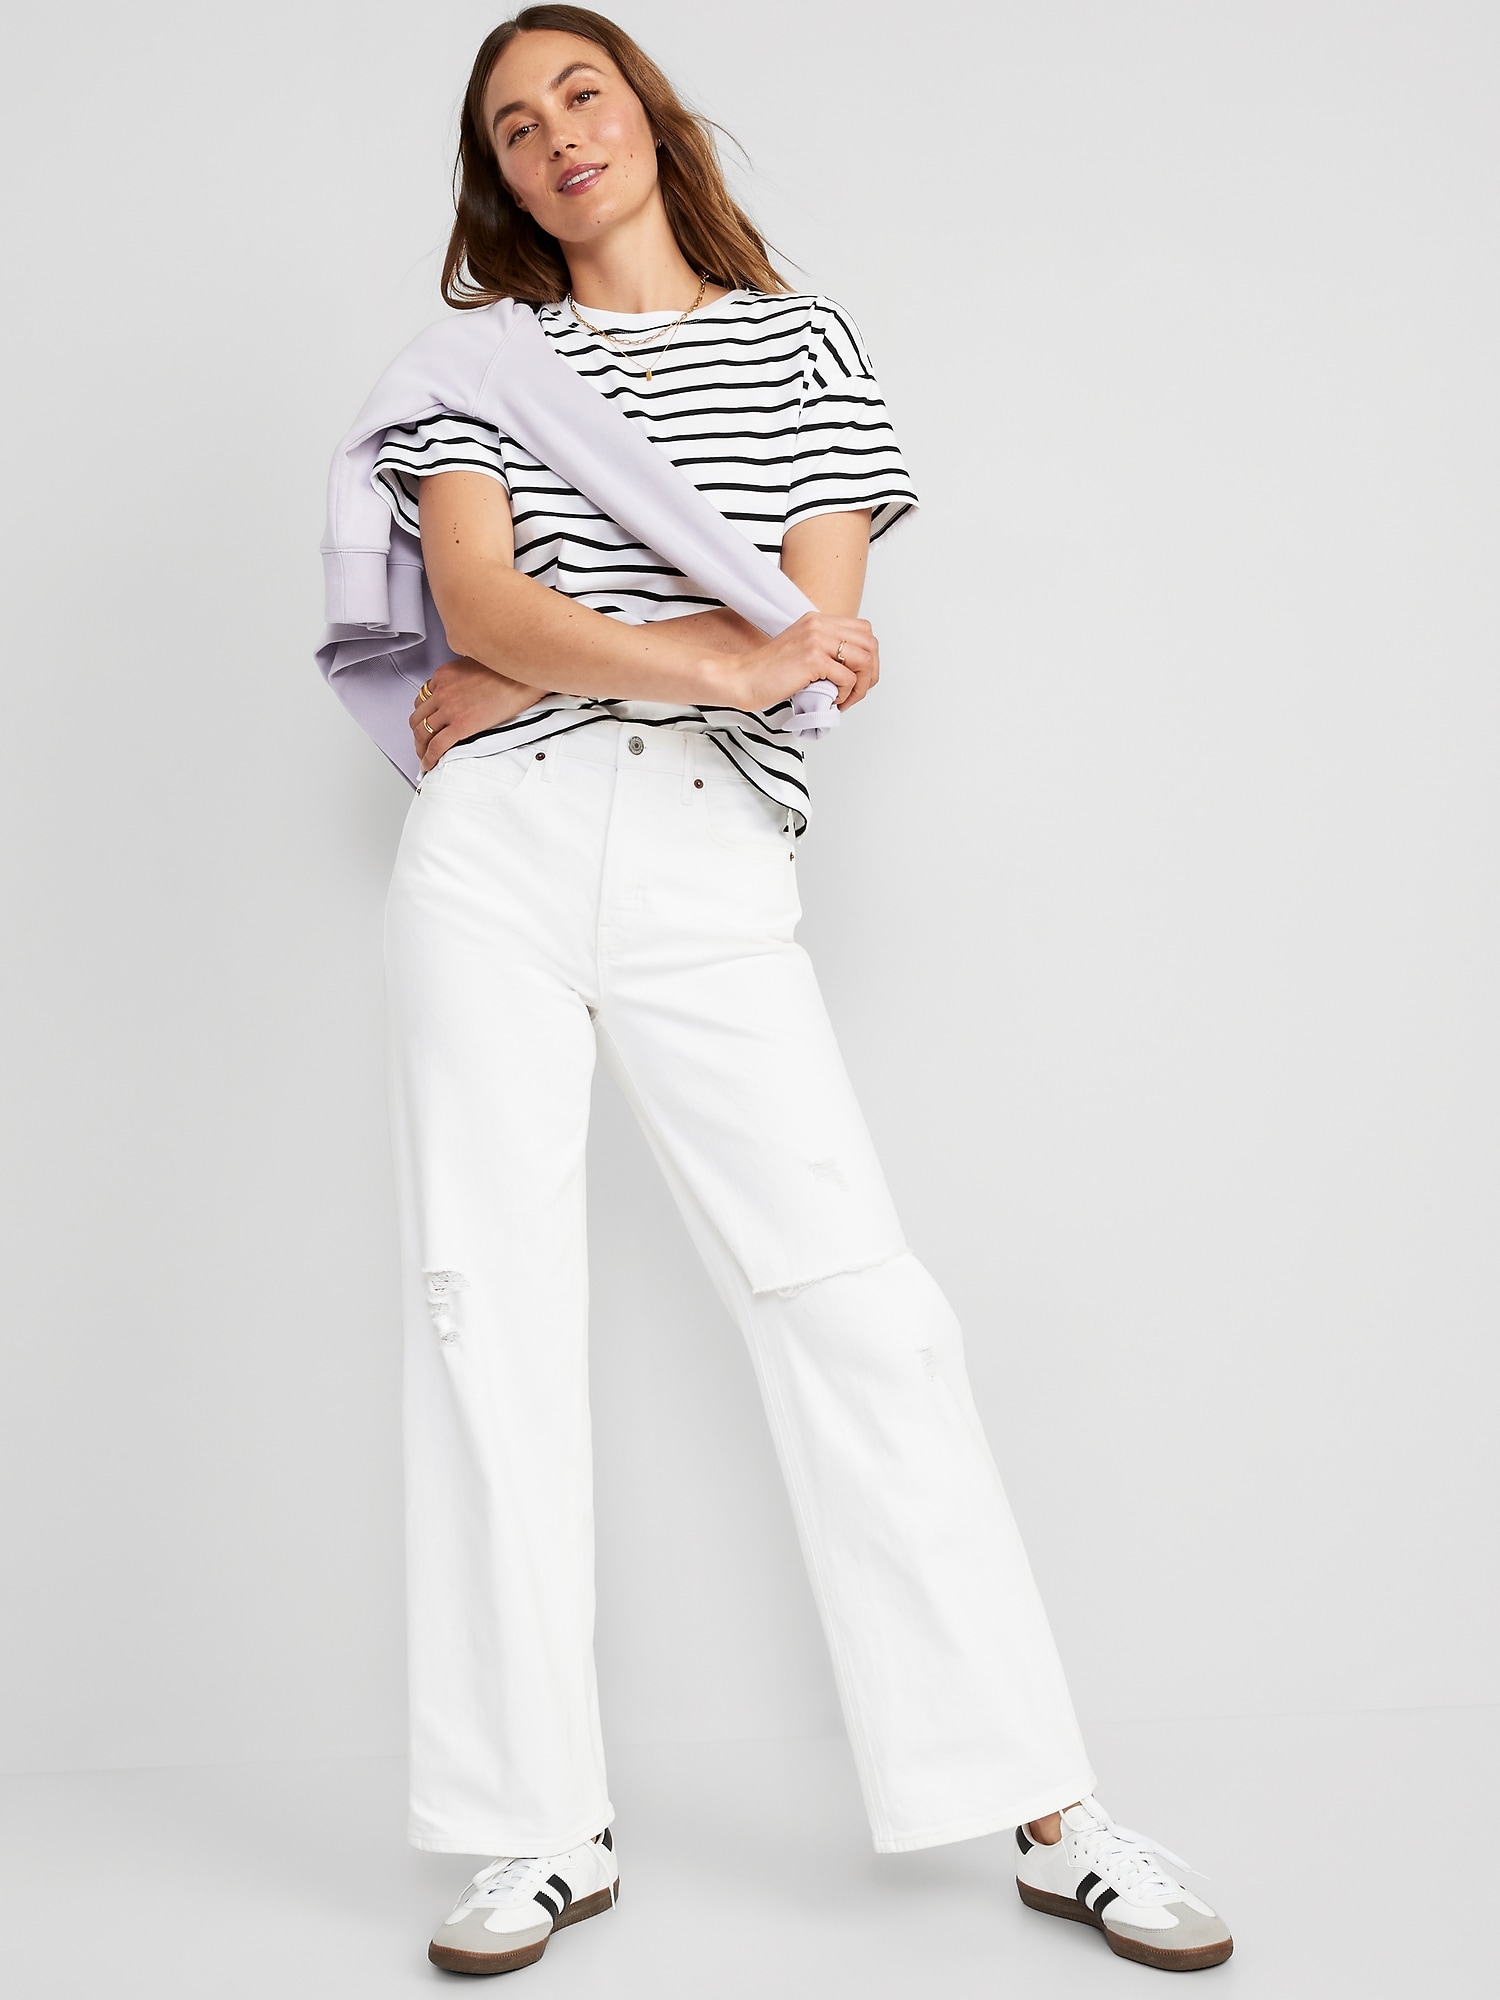 Extra High-Waisted Wide Leg Cut-Off White Jeans for Women | Old Navy